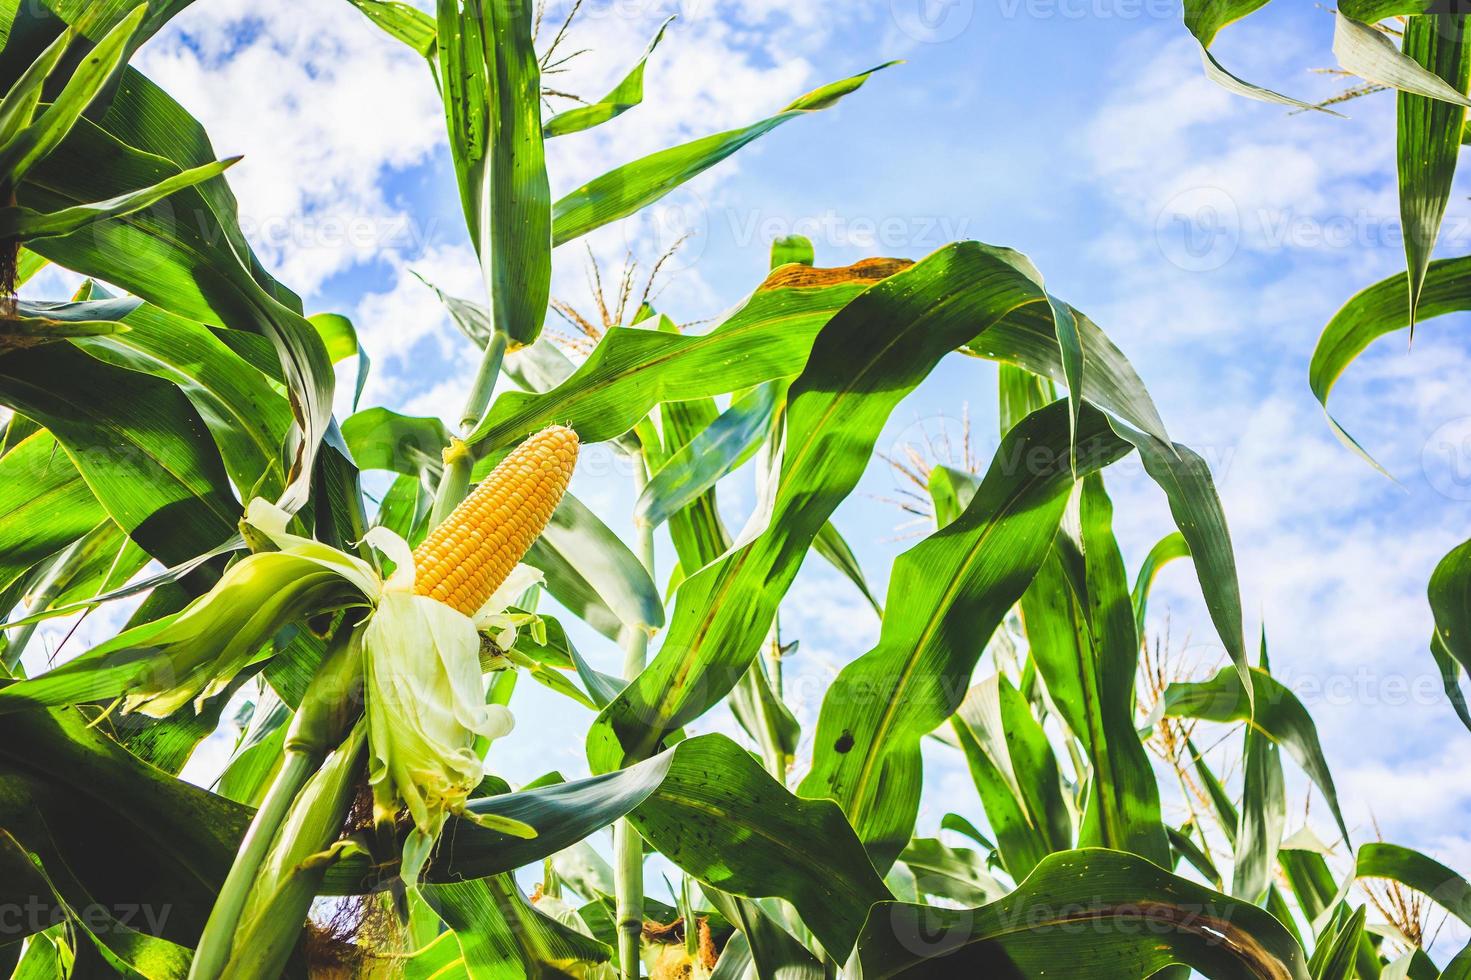 Corn cob growth in agriculture field outdoor with clouds and blue sky photo